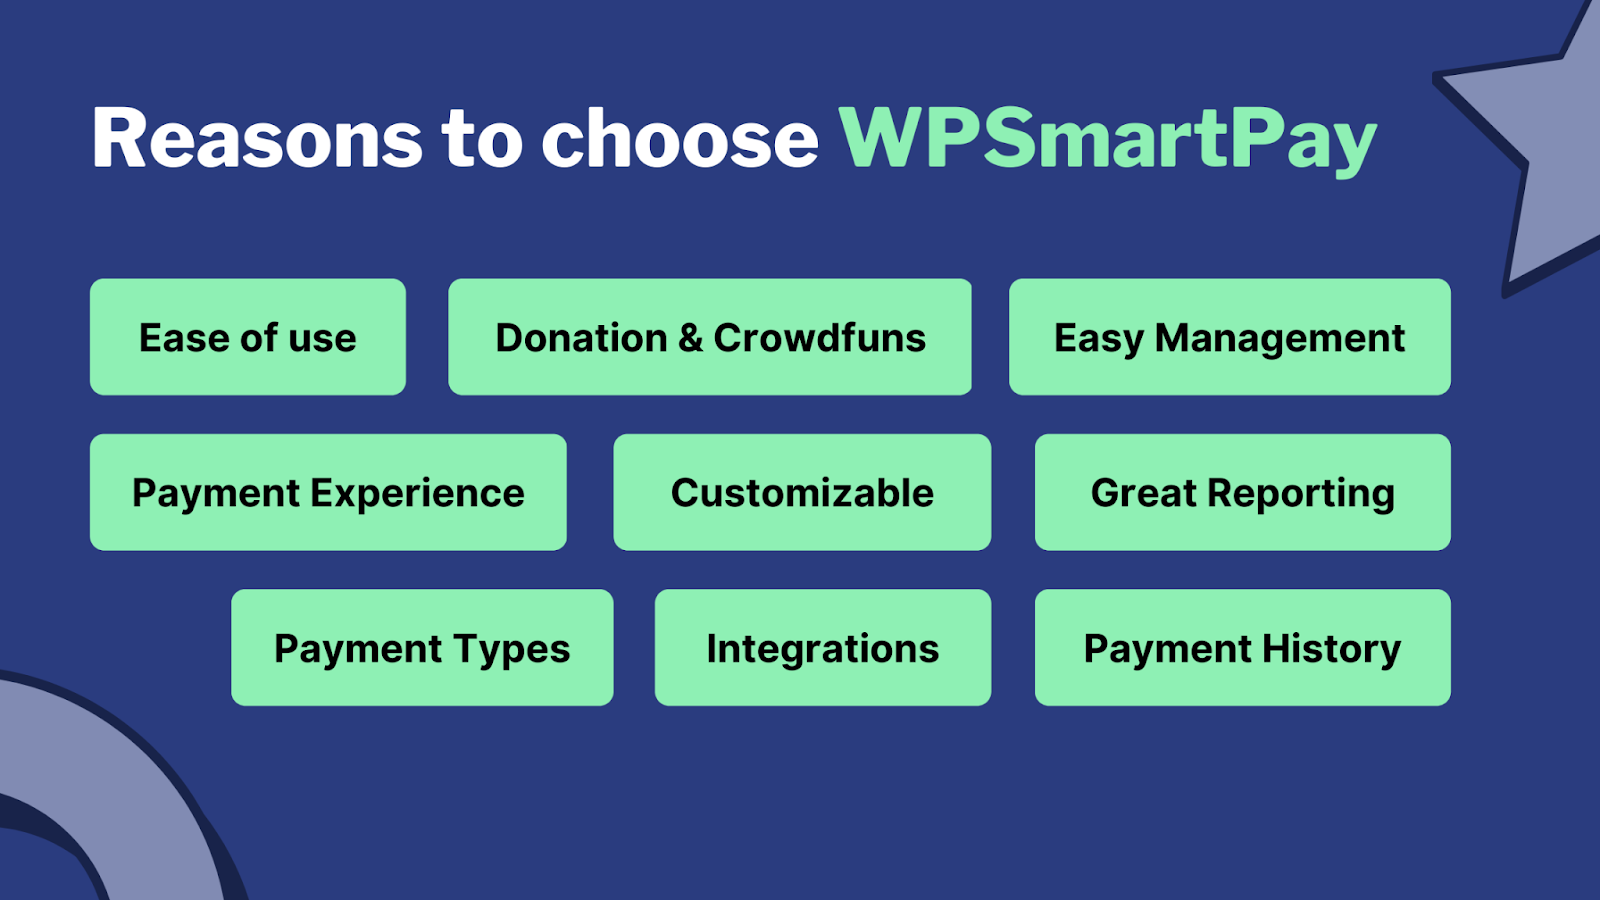 Reasons for Choosing WPSmartPay over Gumroad